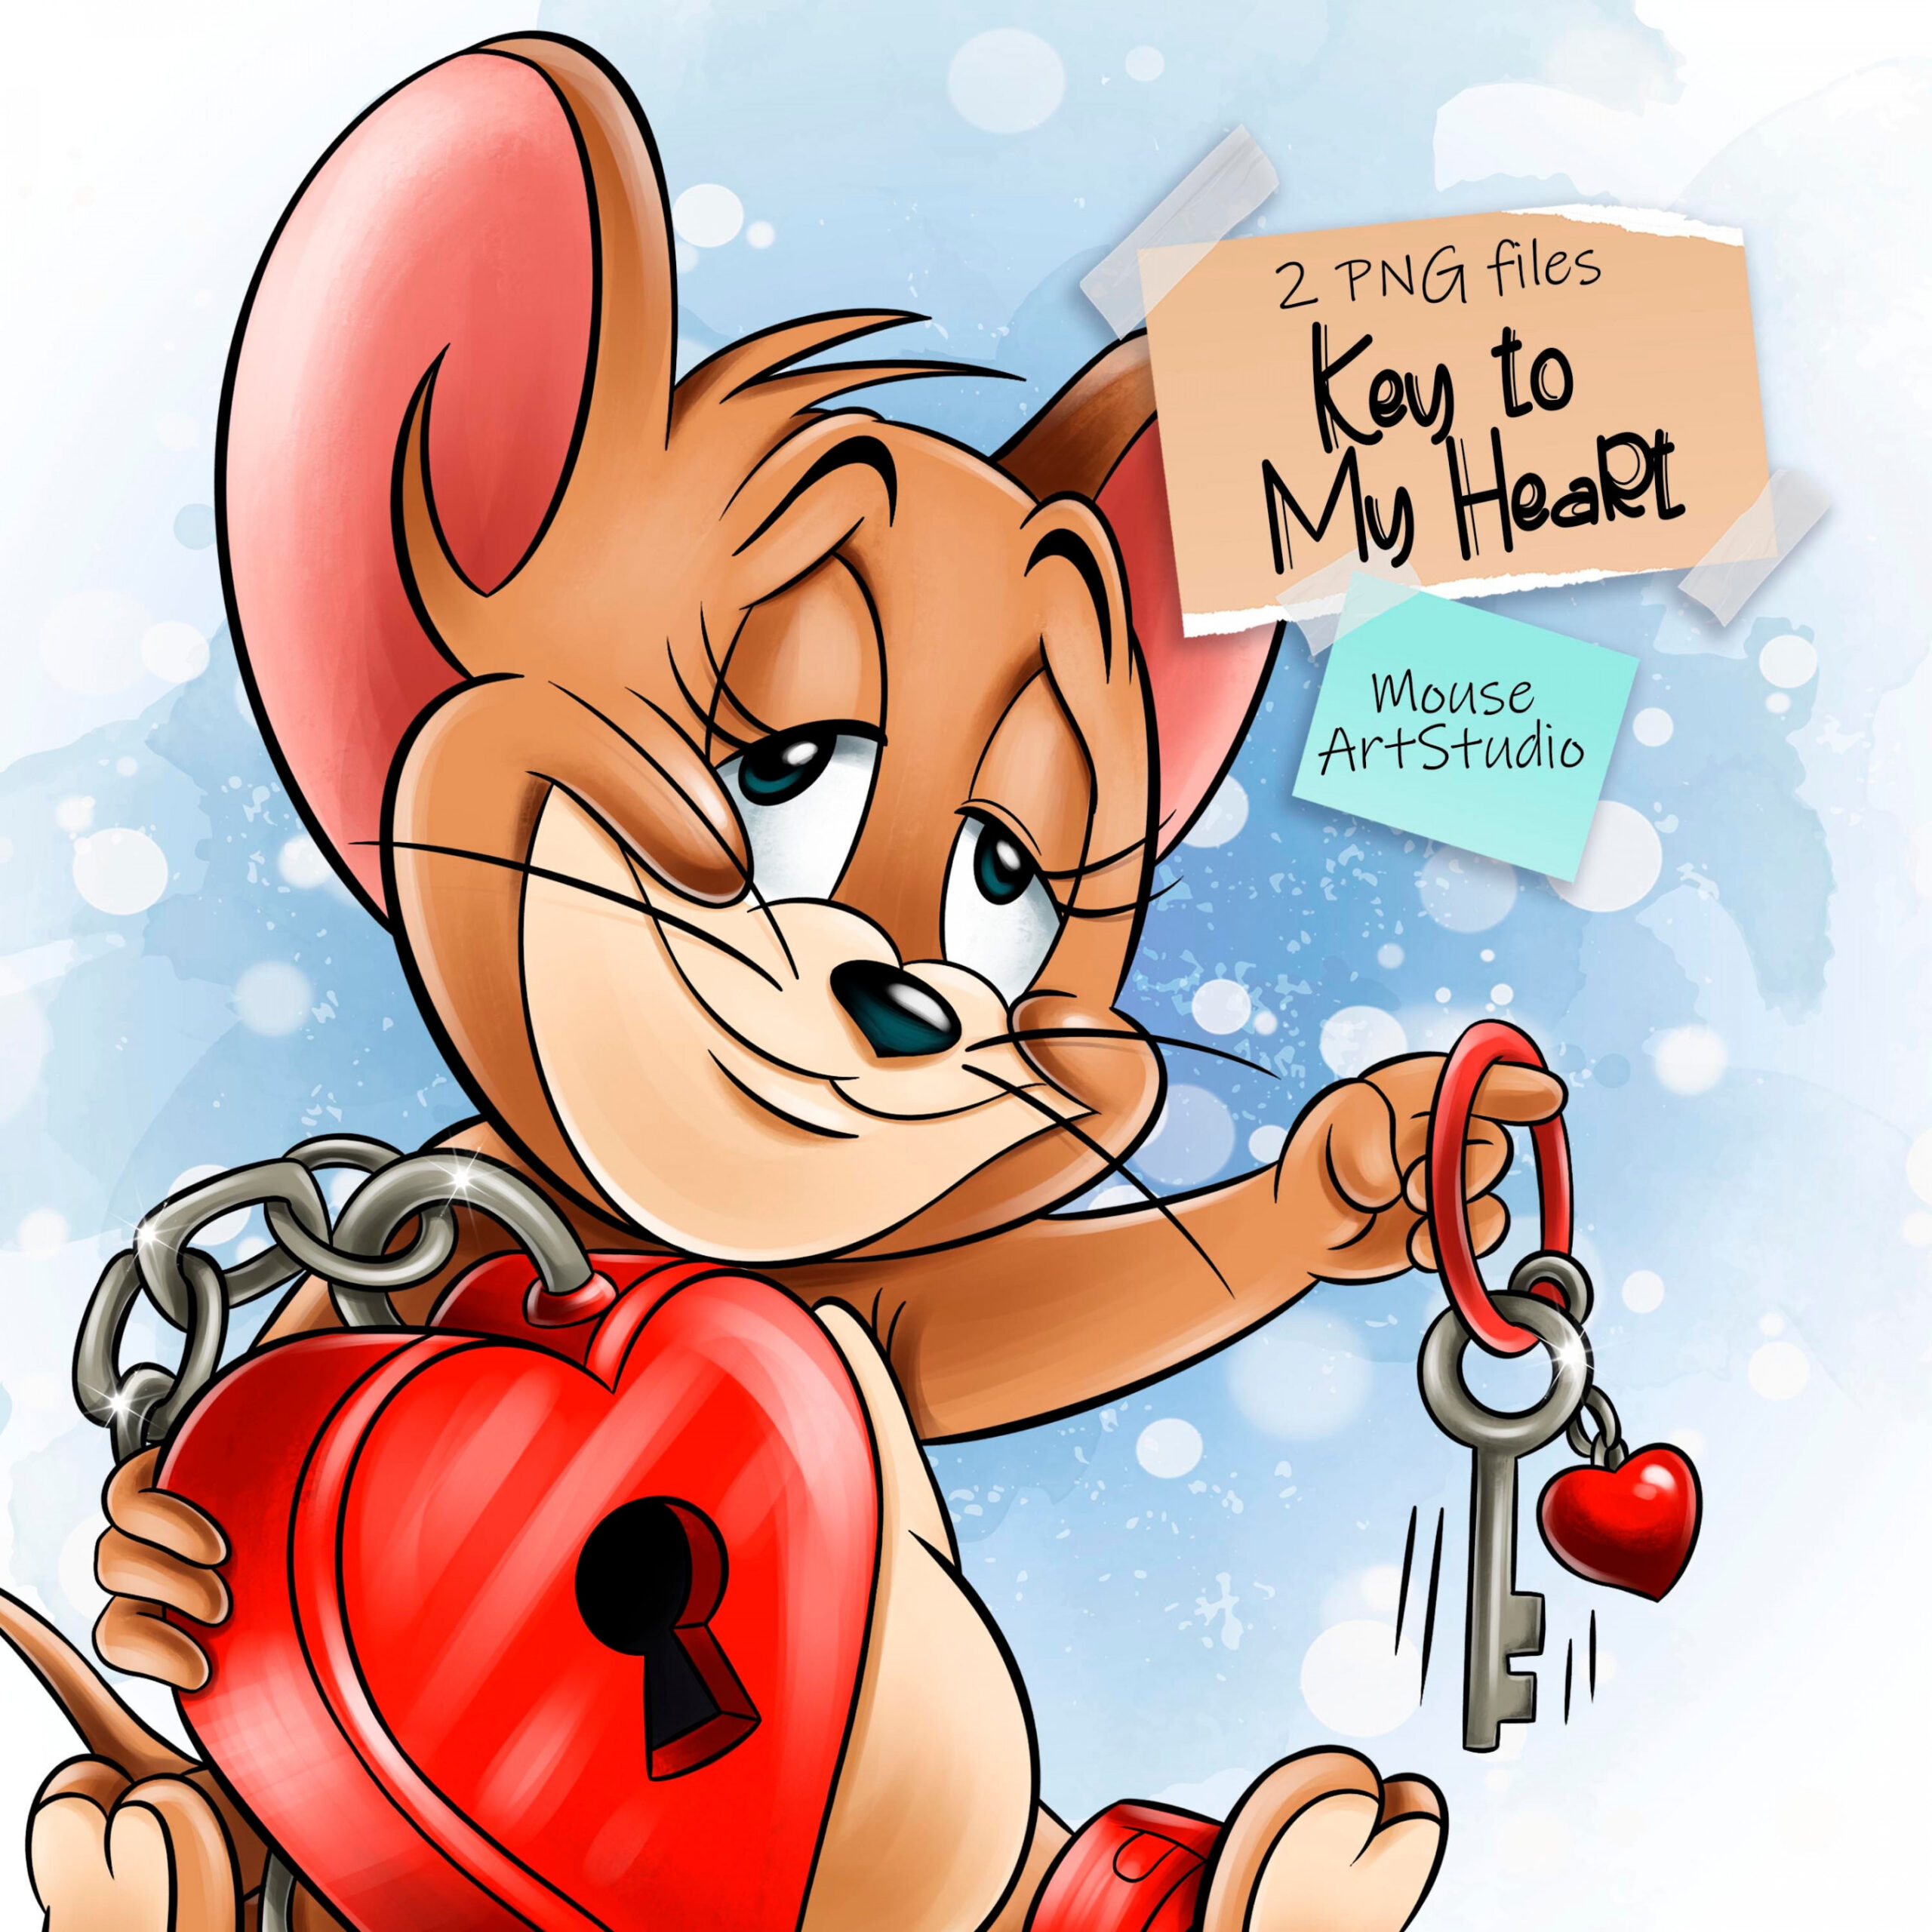 Buy The Key to My Heart, Jerry PNG, Happy Valentine